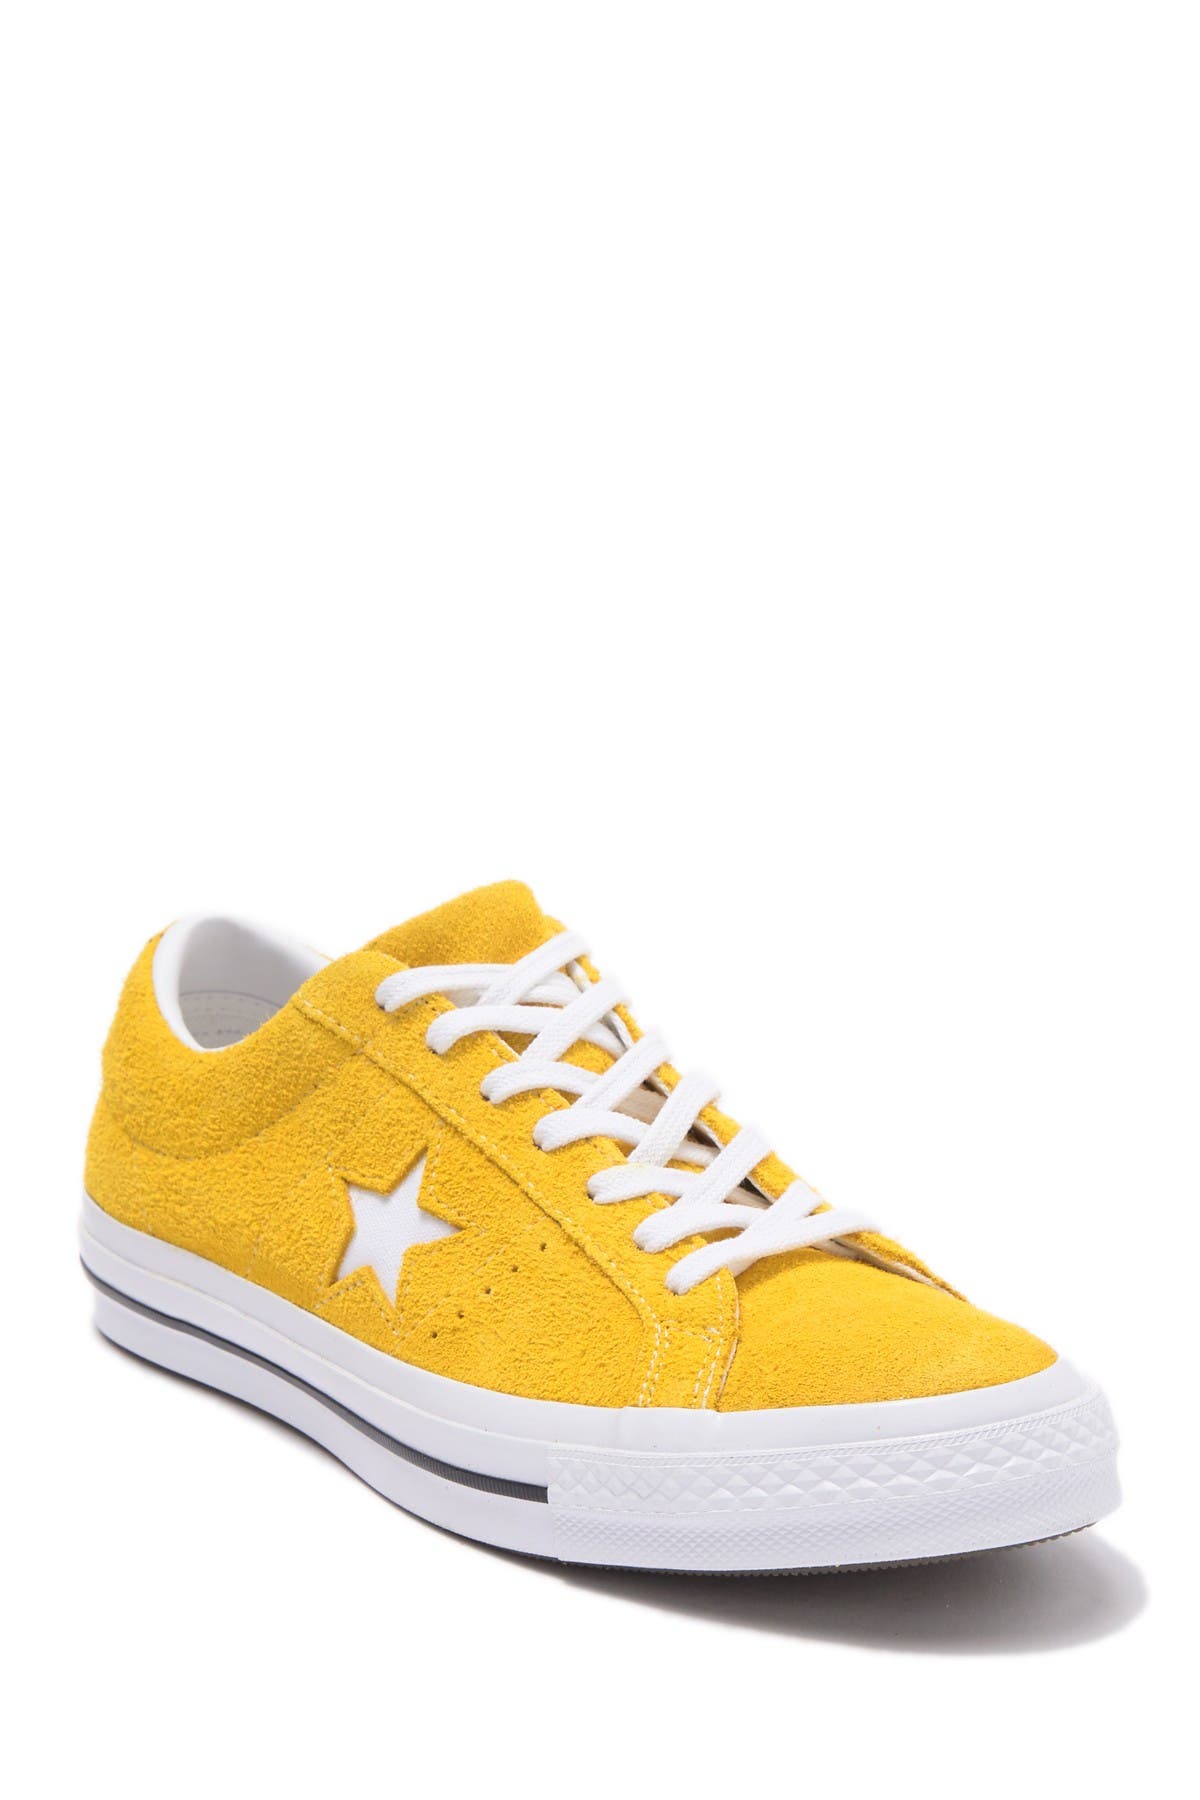 Converse | One Star OX Suede Star 